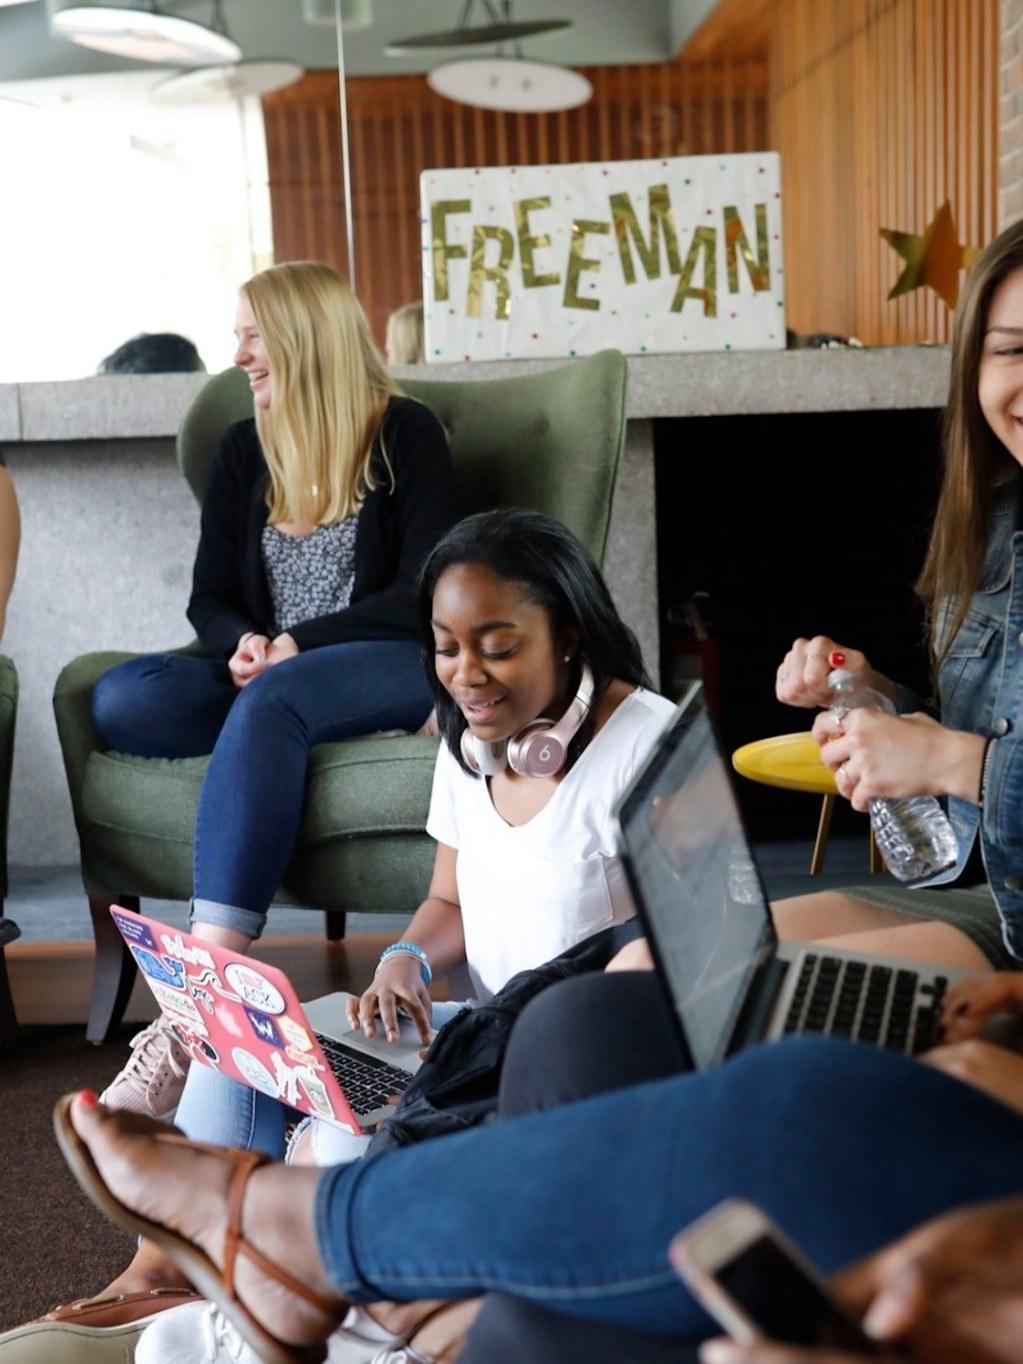 Students hanging out in Freeman living room.